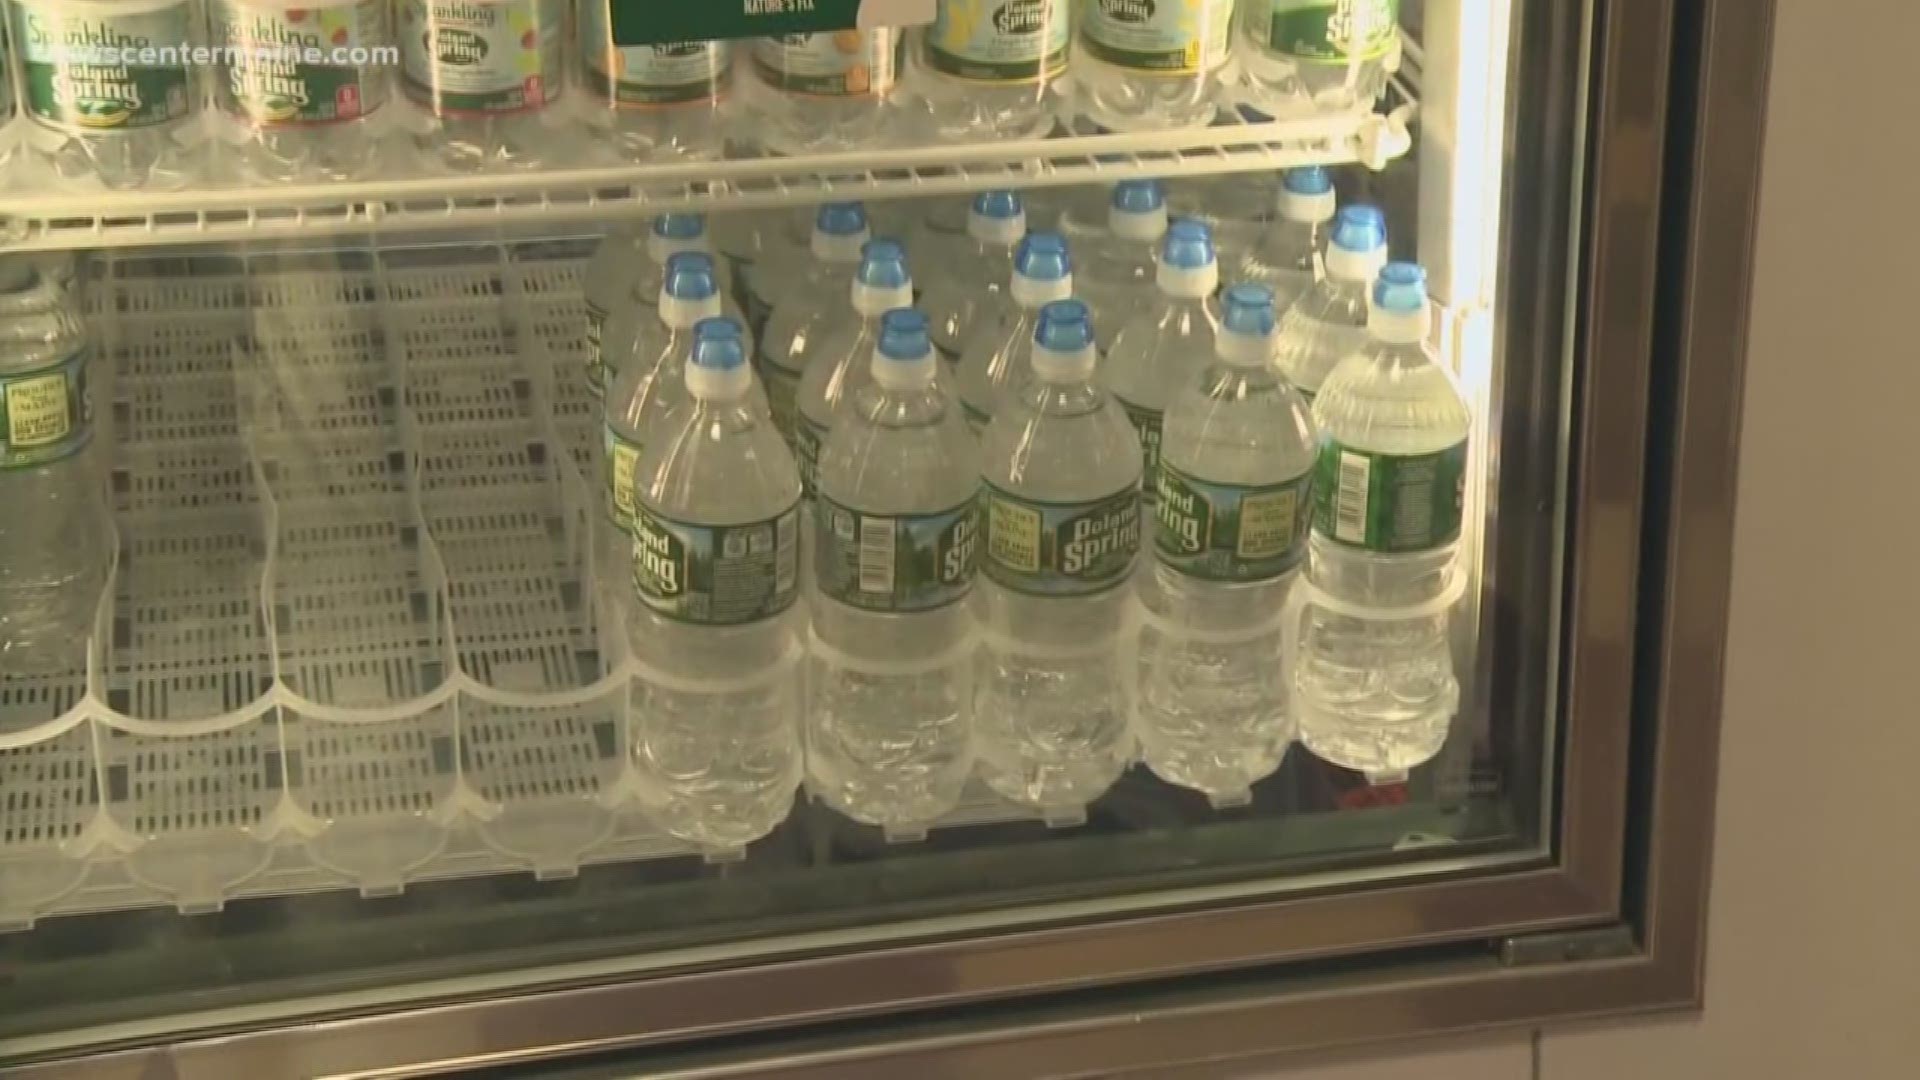 A proposal to tax bottling for Poland Spring water seems headed for defeat.